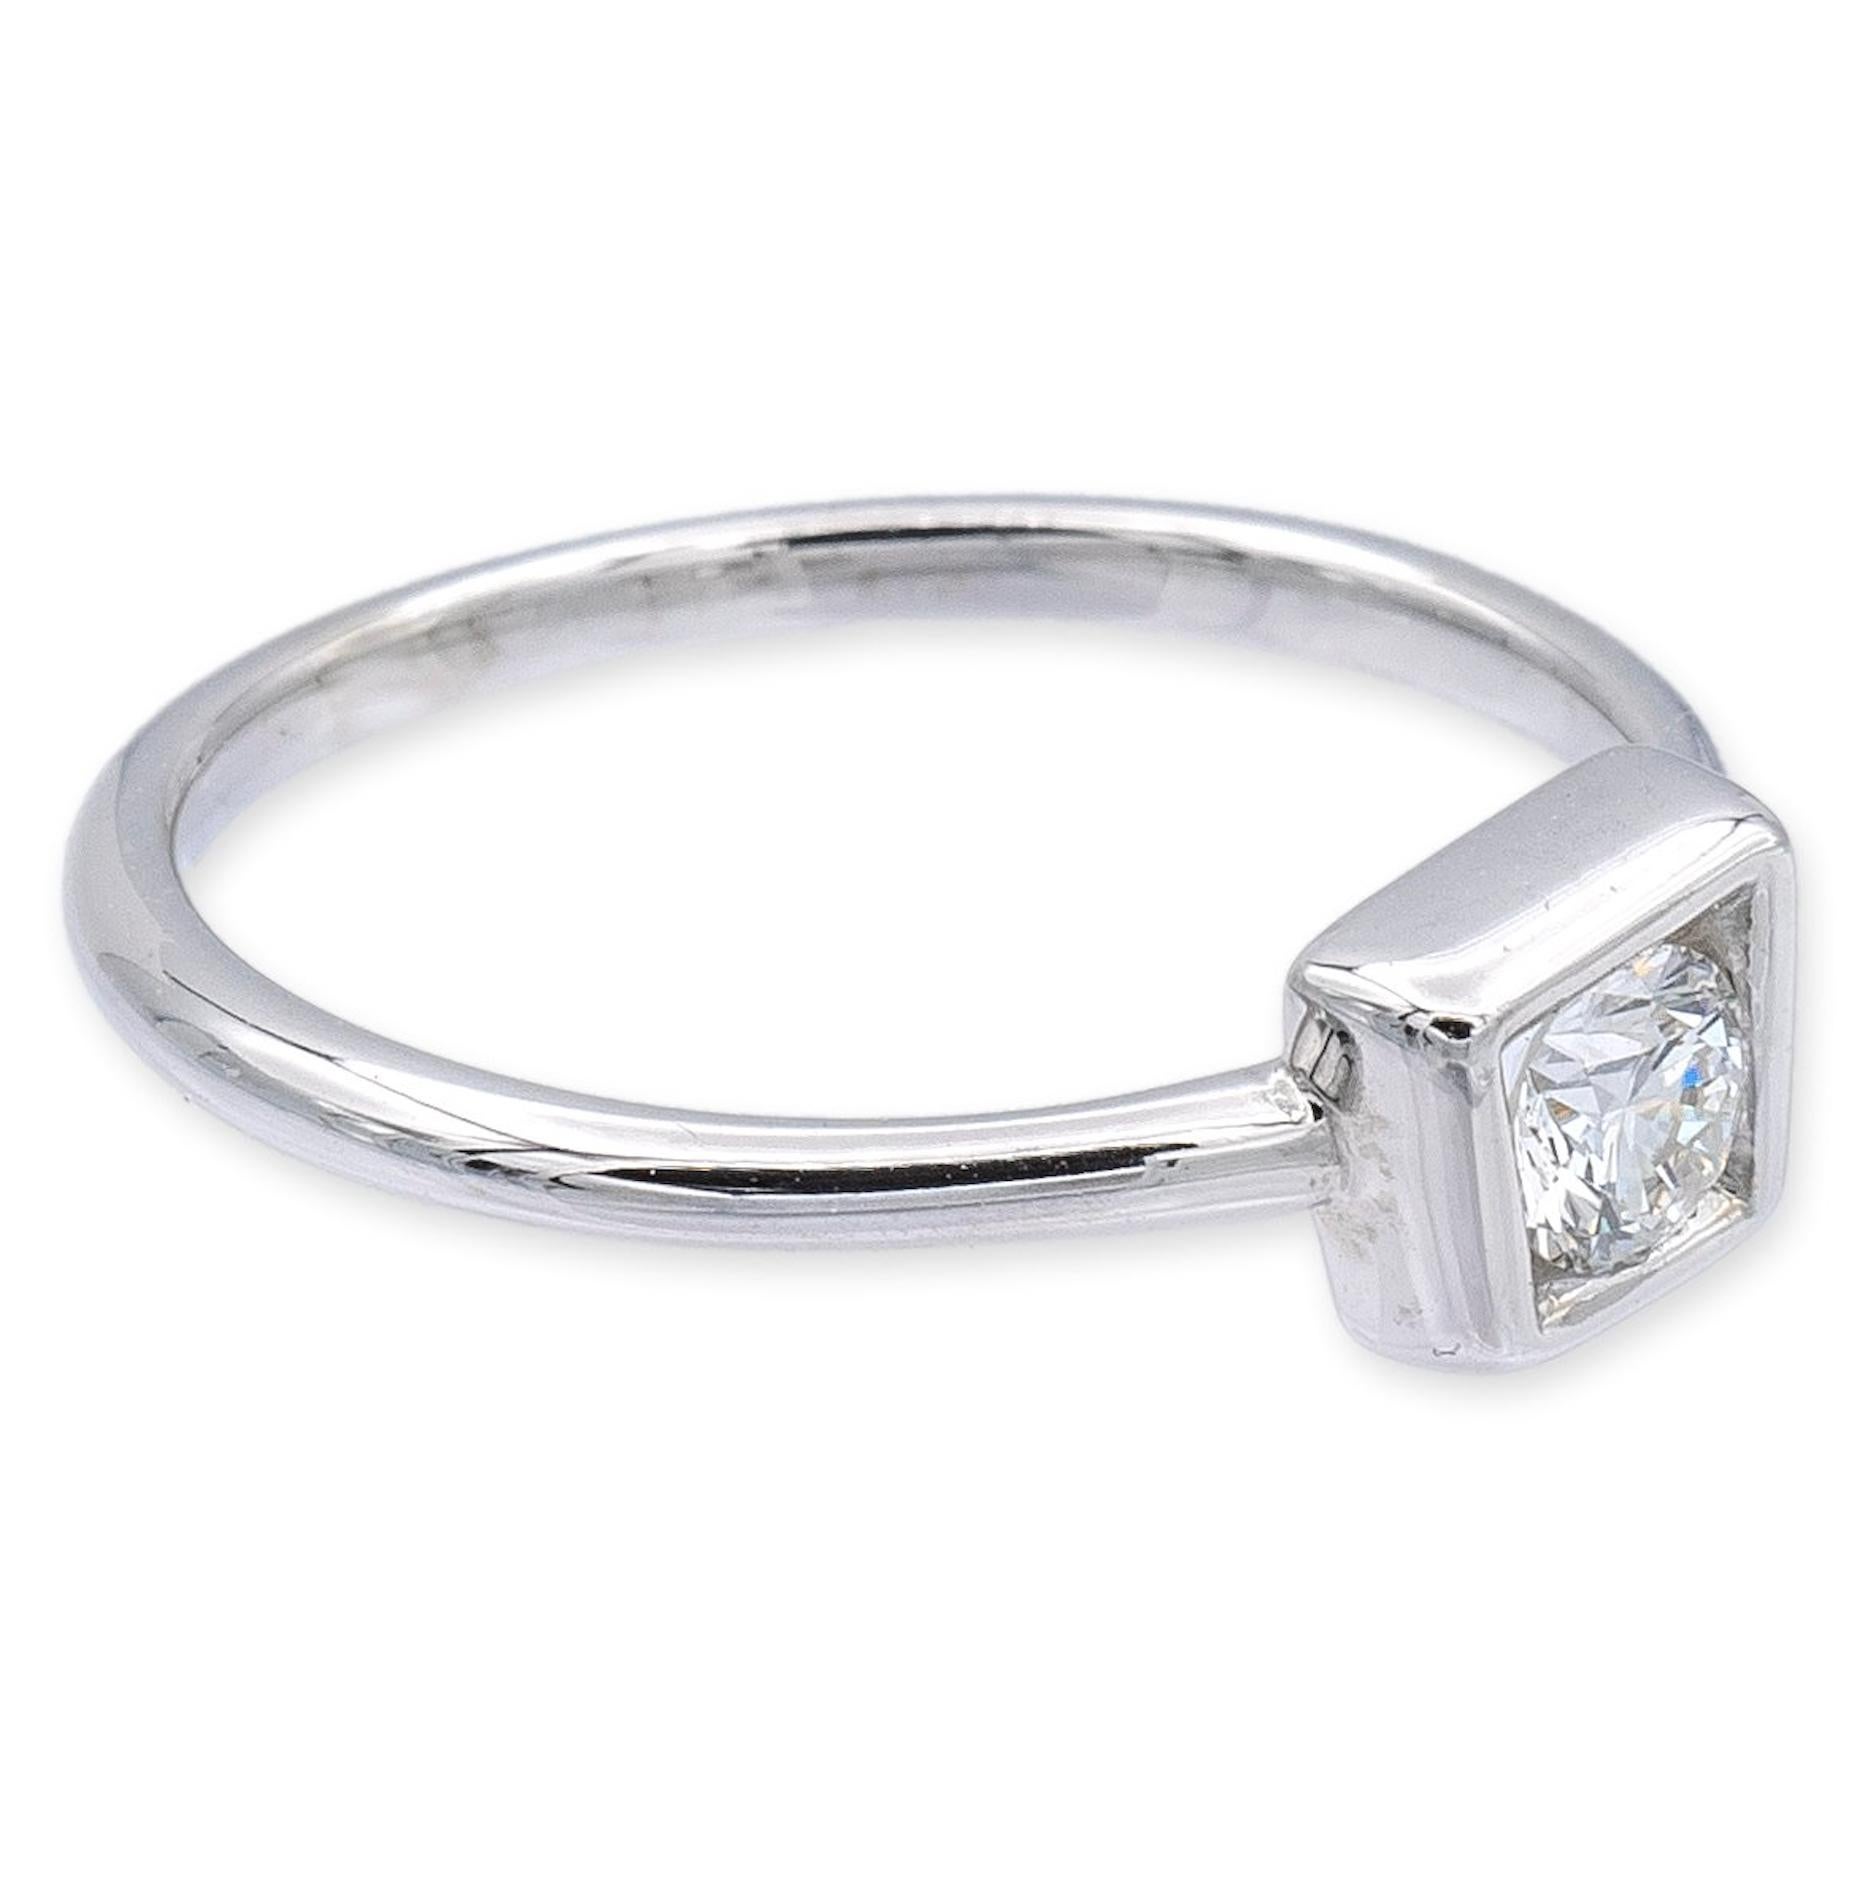 Tiffany & Co limited edition signature ring by Frank Gehry finely crafted in 18 karat white gold featuring a round brilliant cut 0.20 center E color VS1 clarity set inside a minimalist style square bezel. Square measures 5mm approximately. Fully